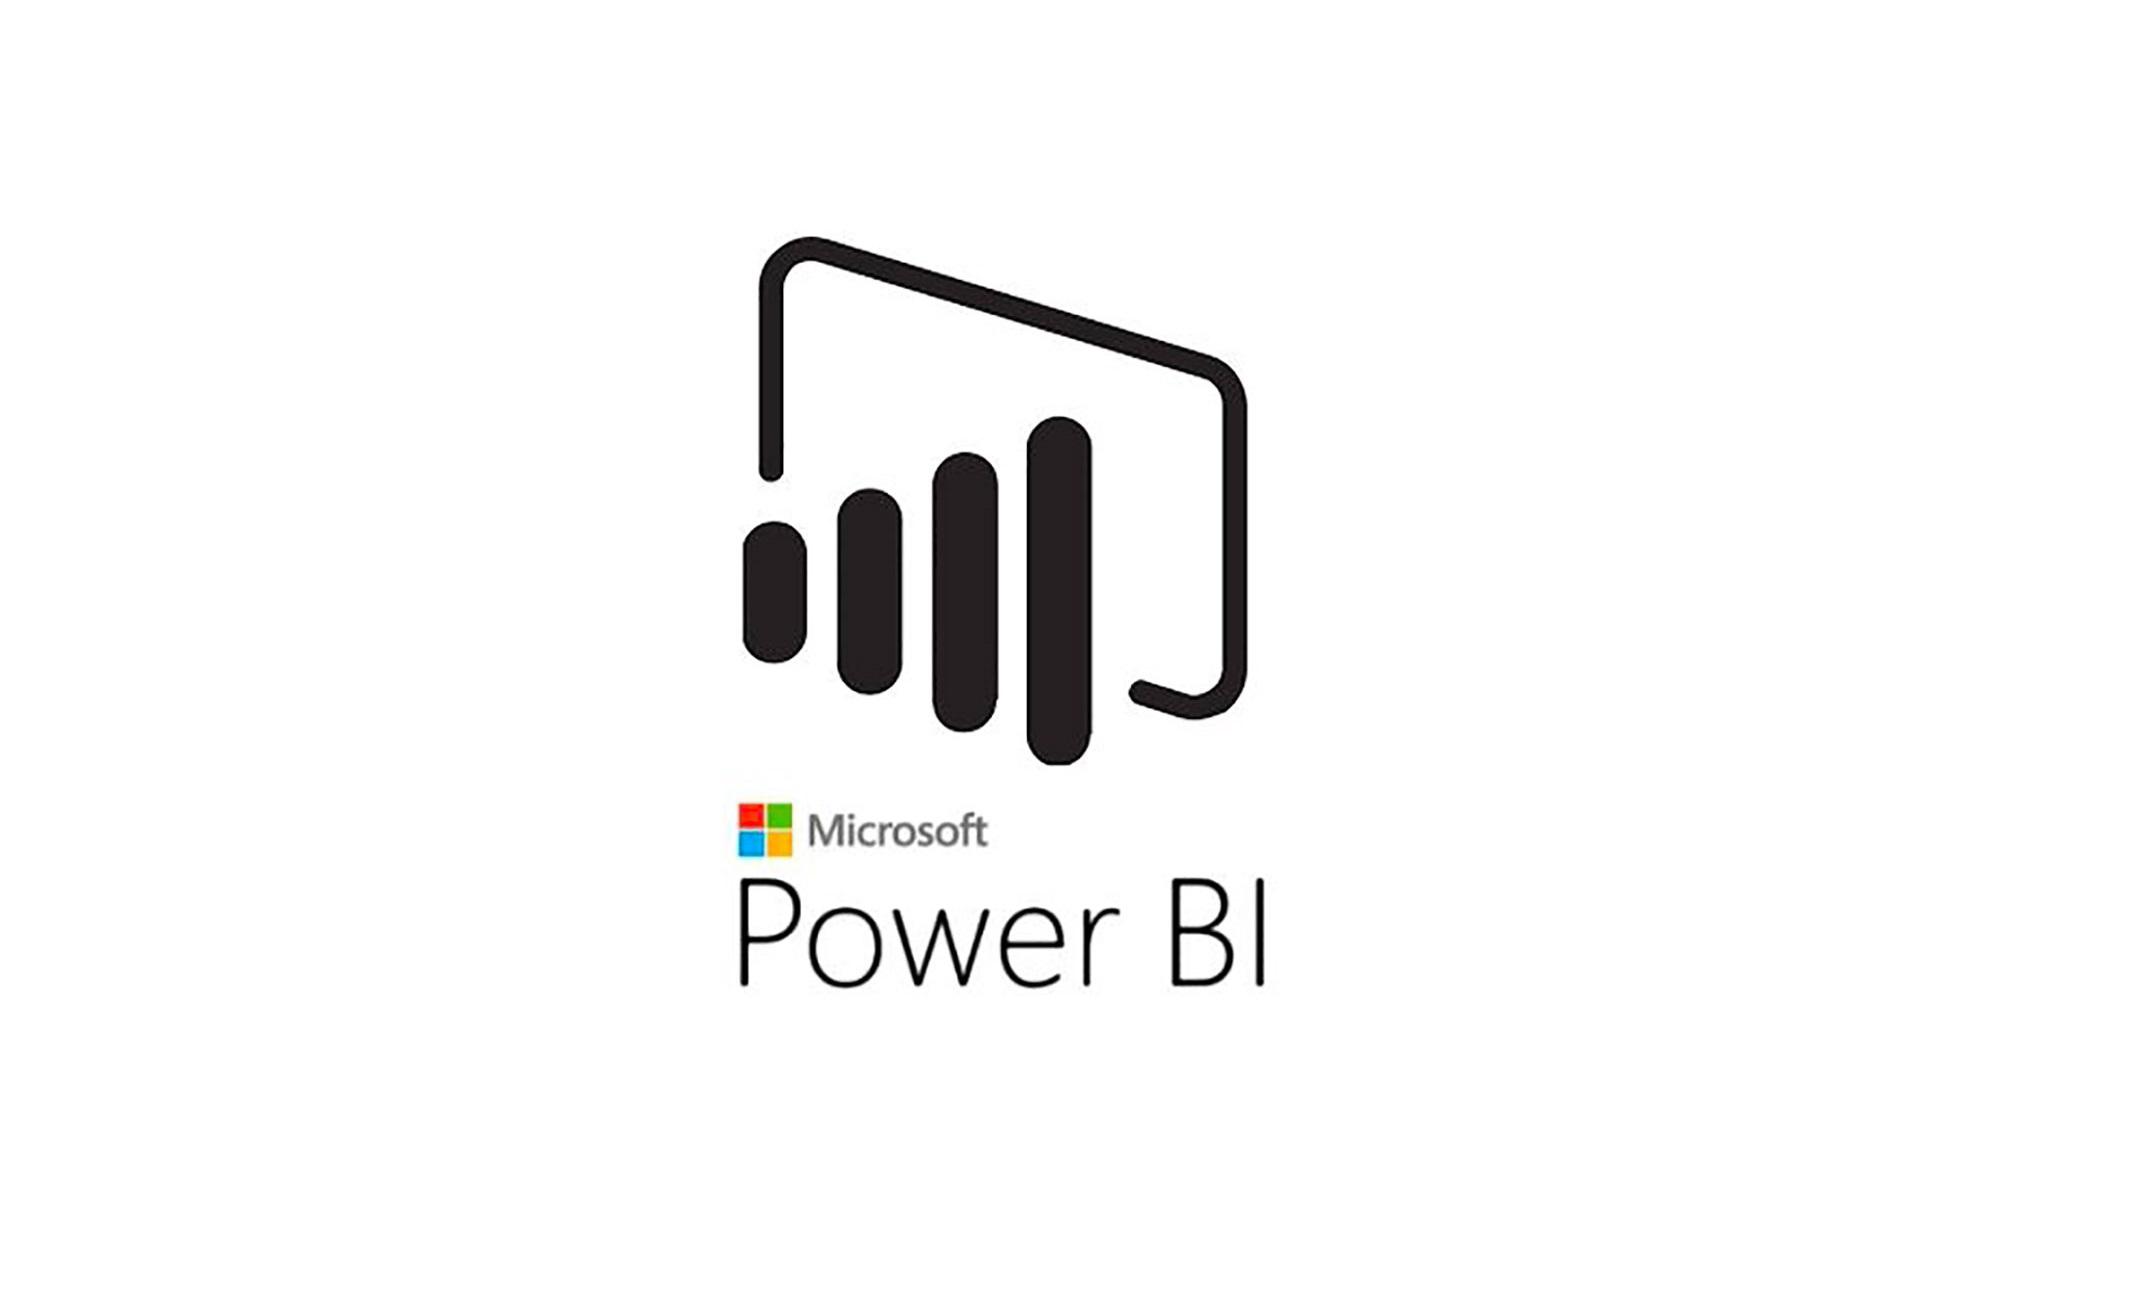 Microsoft Power BI Training in Wilmington | Introduction to Power BI training for beginners | Getting started with Power BI | What is Power BI | January 20, 2020 - February 12, 2020